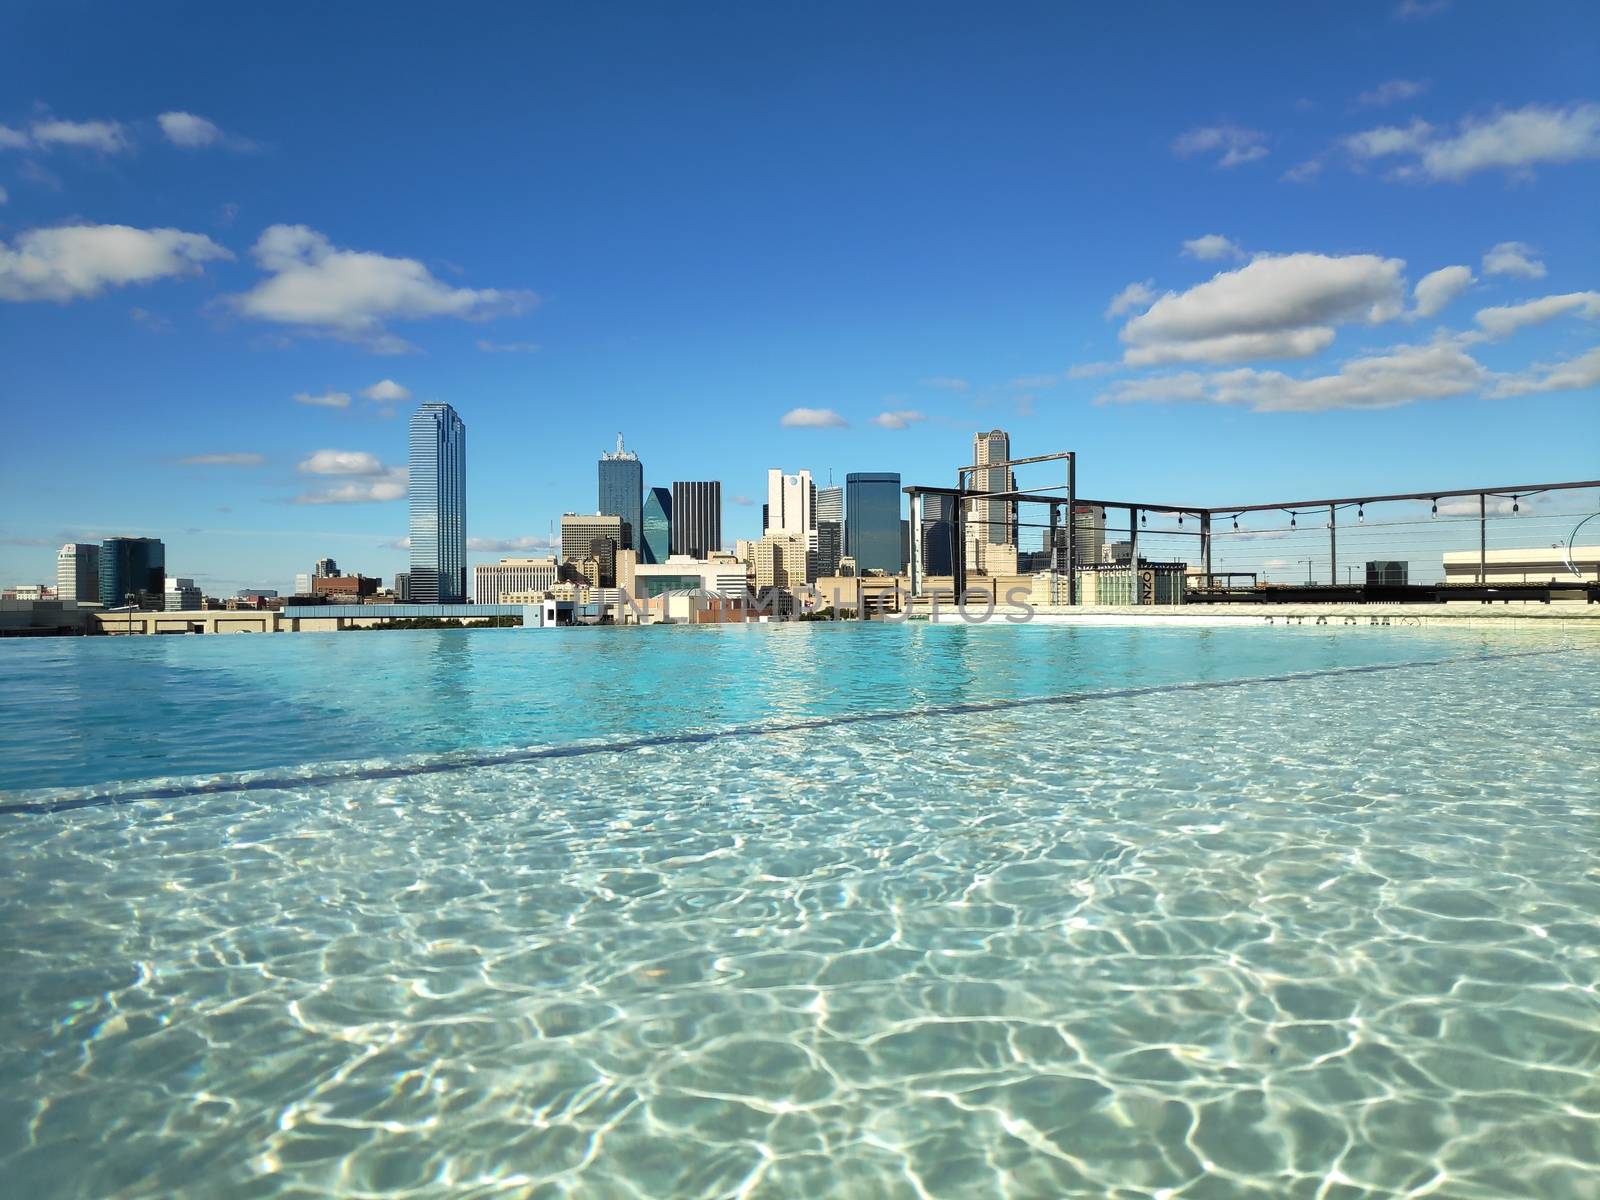 Stunning infinity pool view over the skyline of Dallas by pisces2386